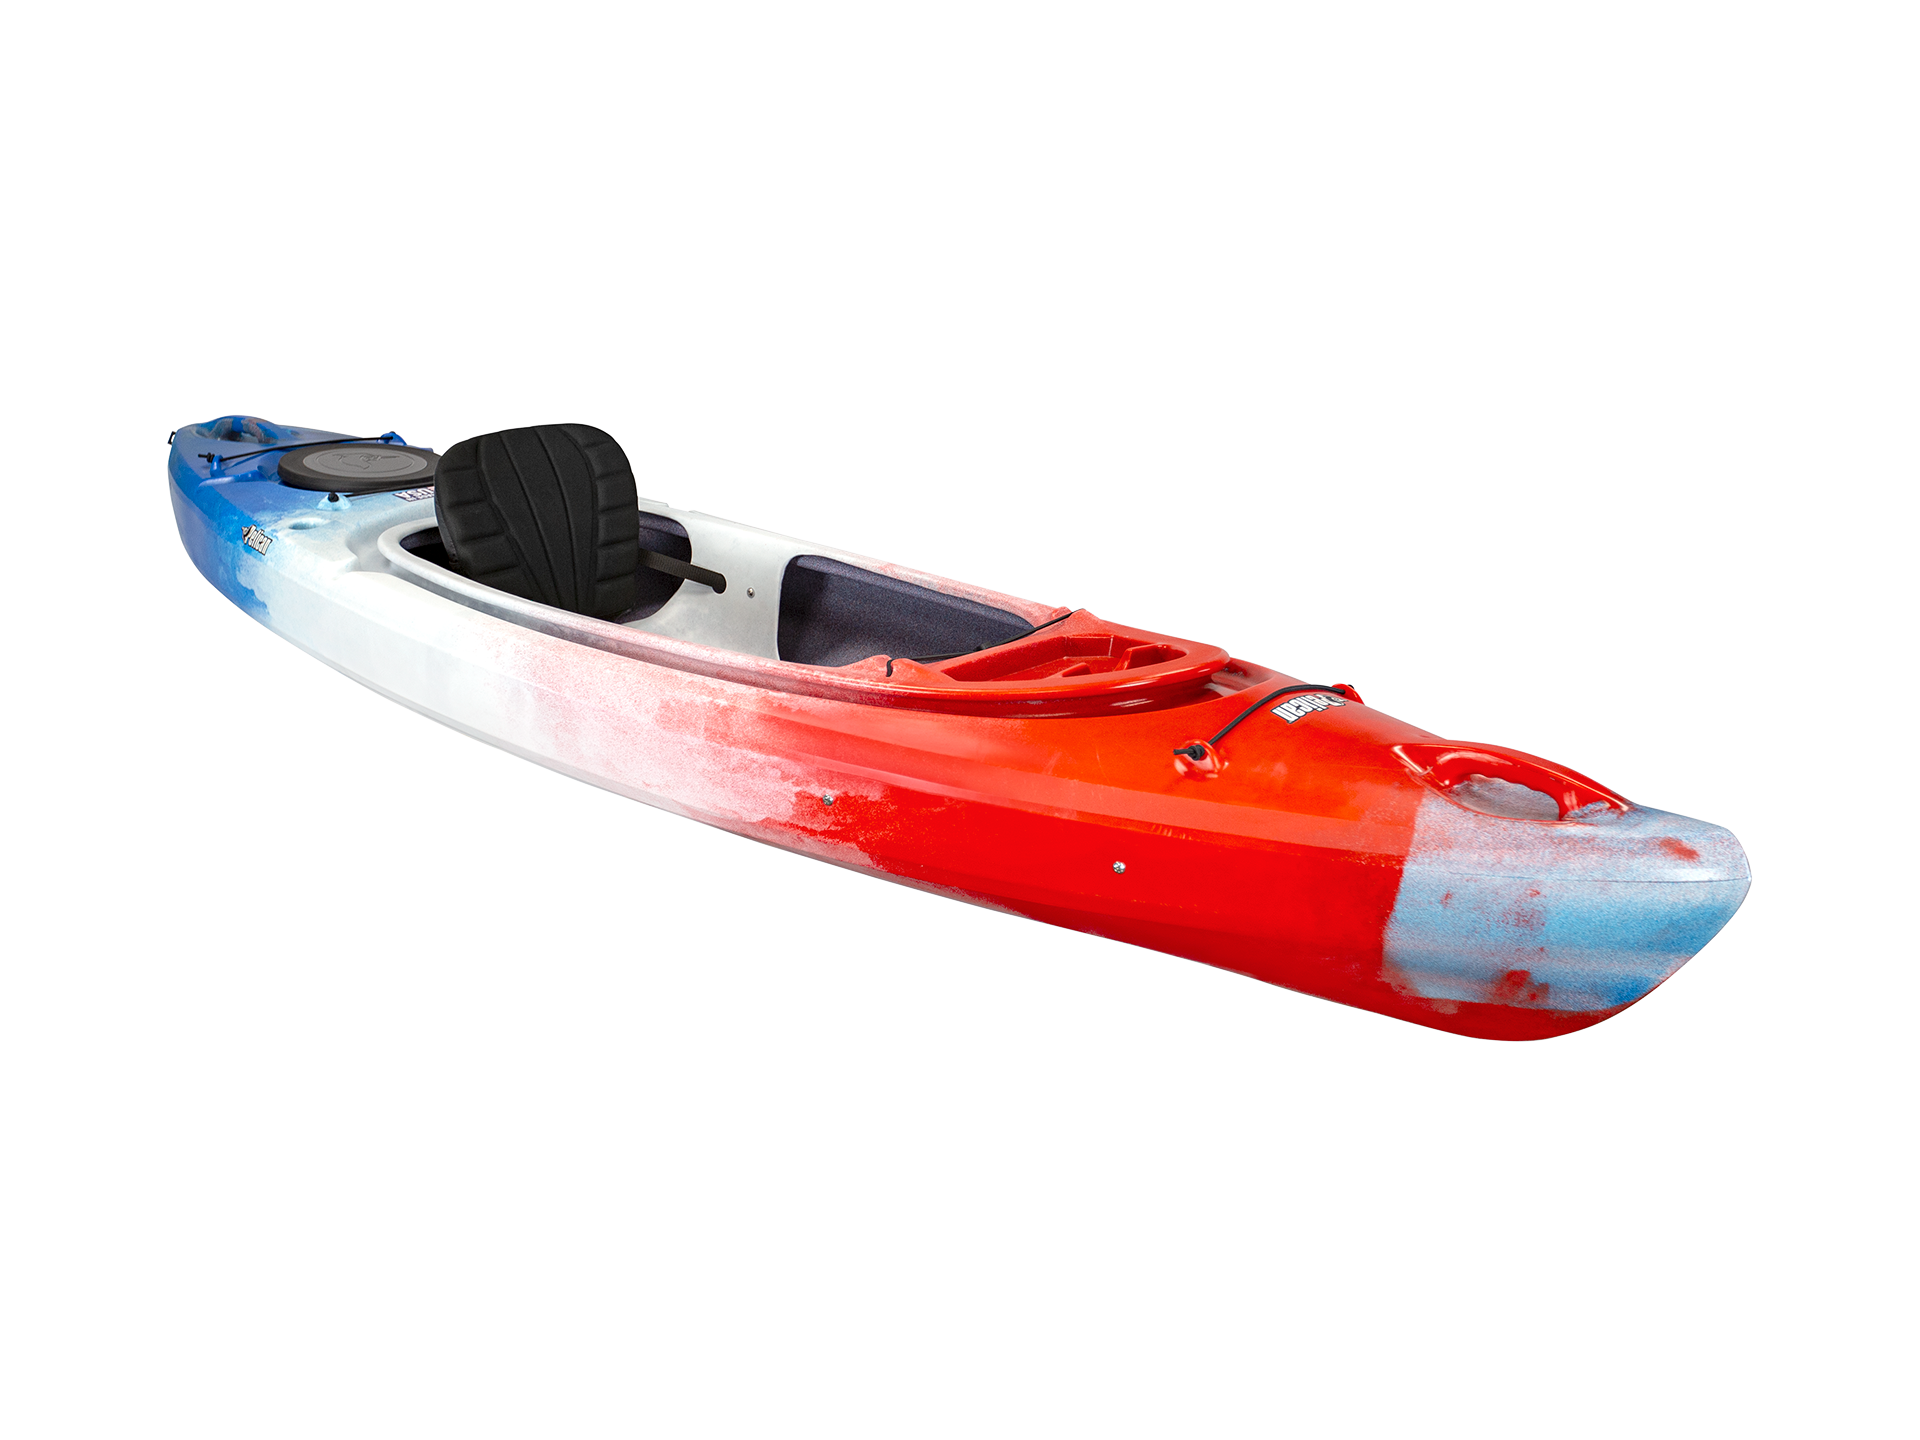 Pelican - Liberty Recreational Kayak - Red White Blue - image 2 of 8